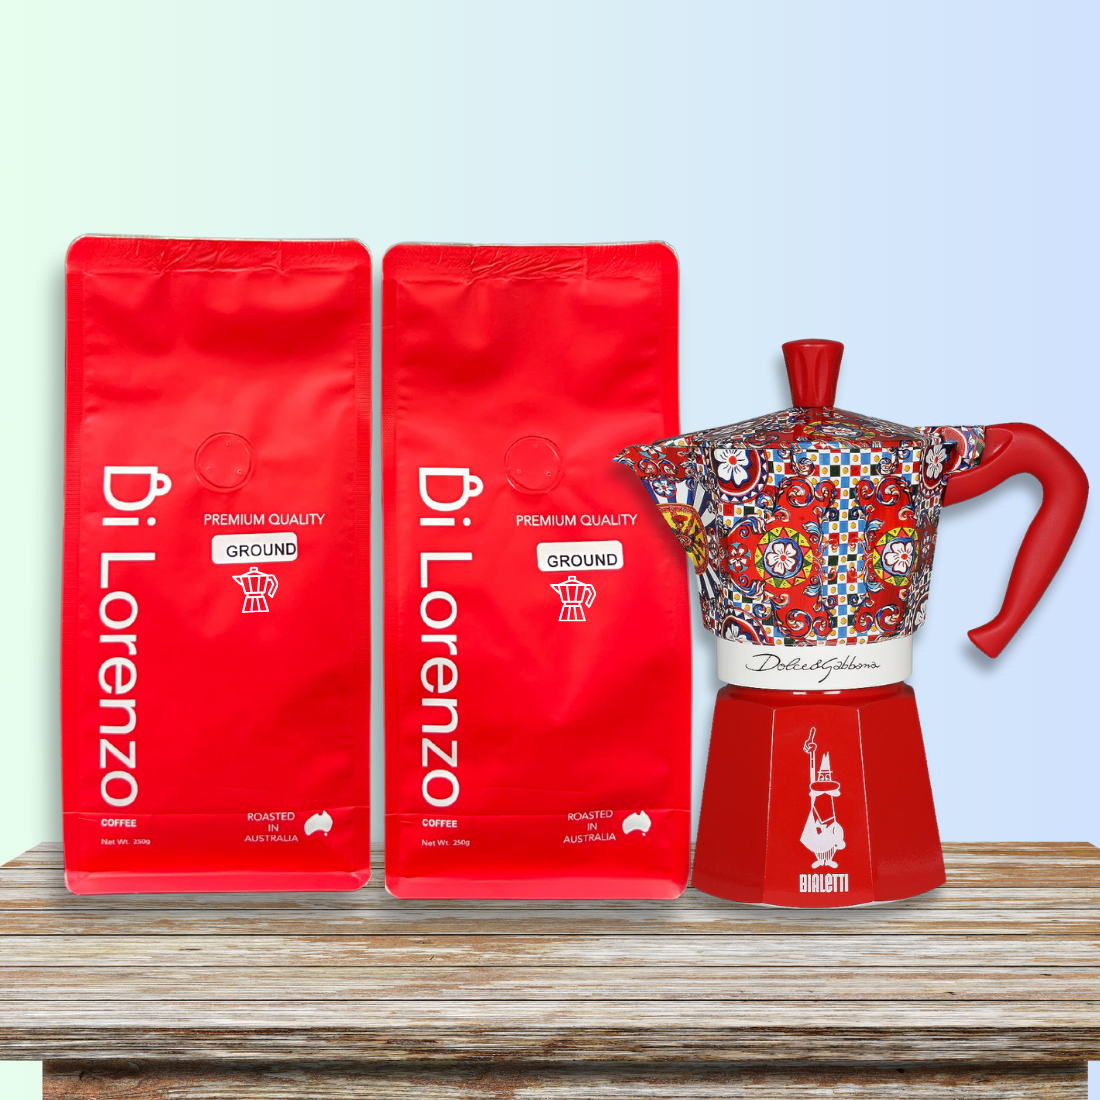 Bright red bags of Di Lorenzo premium quality ground coffee, ground specifically for Moka stove top,  beside a colorful, artistically designed Bialetti moka pot on a rustic wooden table, against a soft blue gradient backdrop.